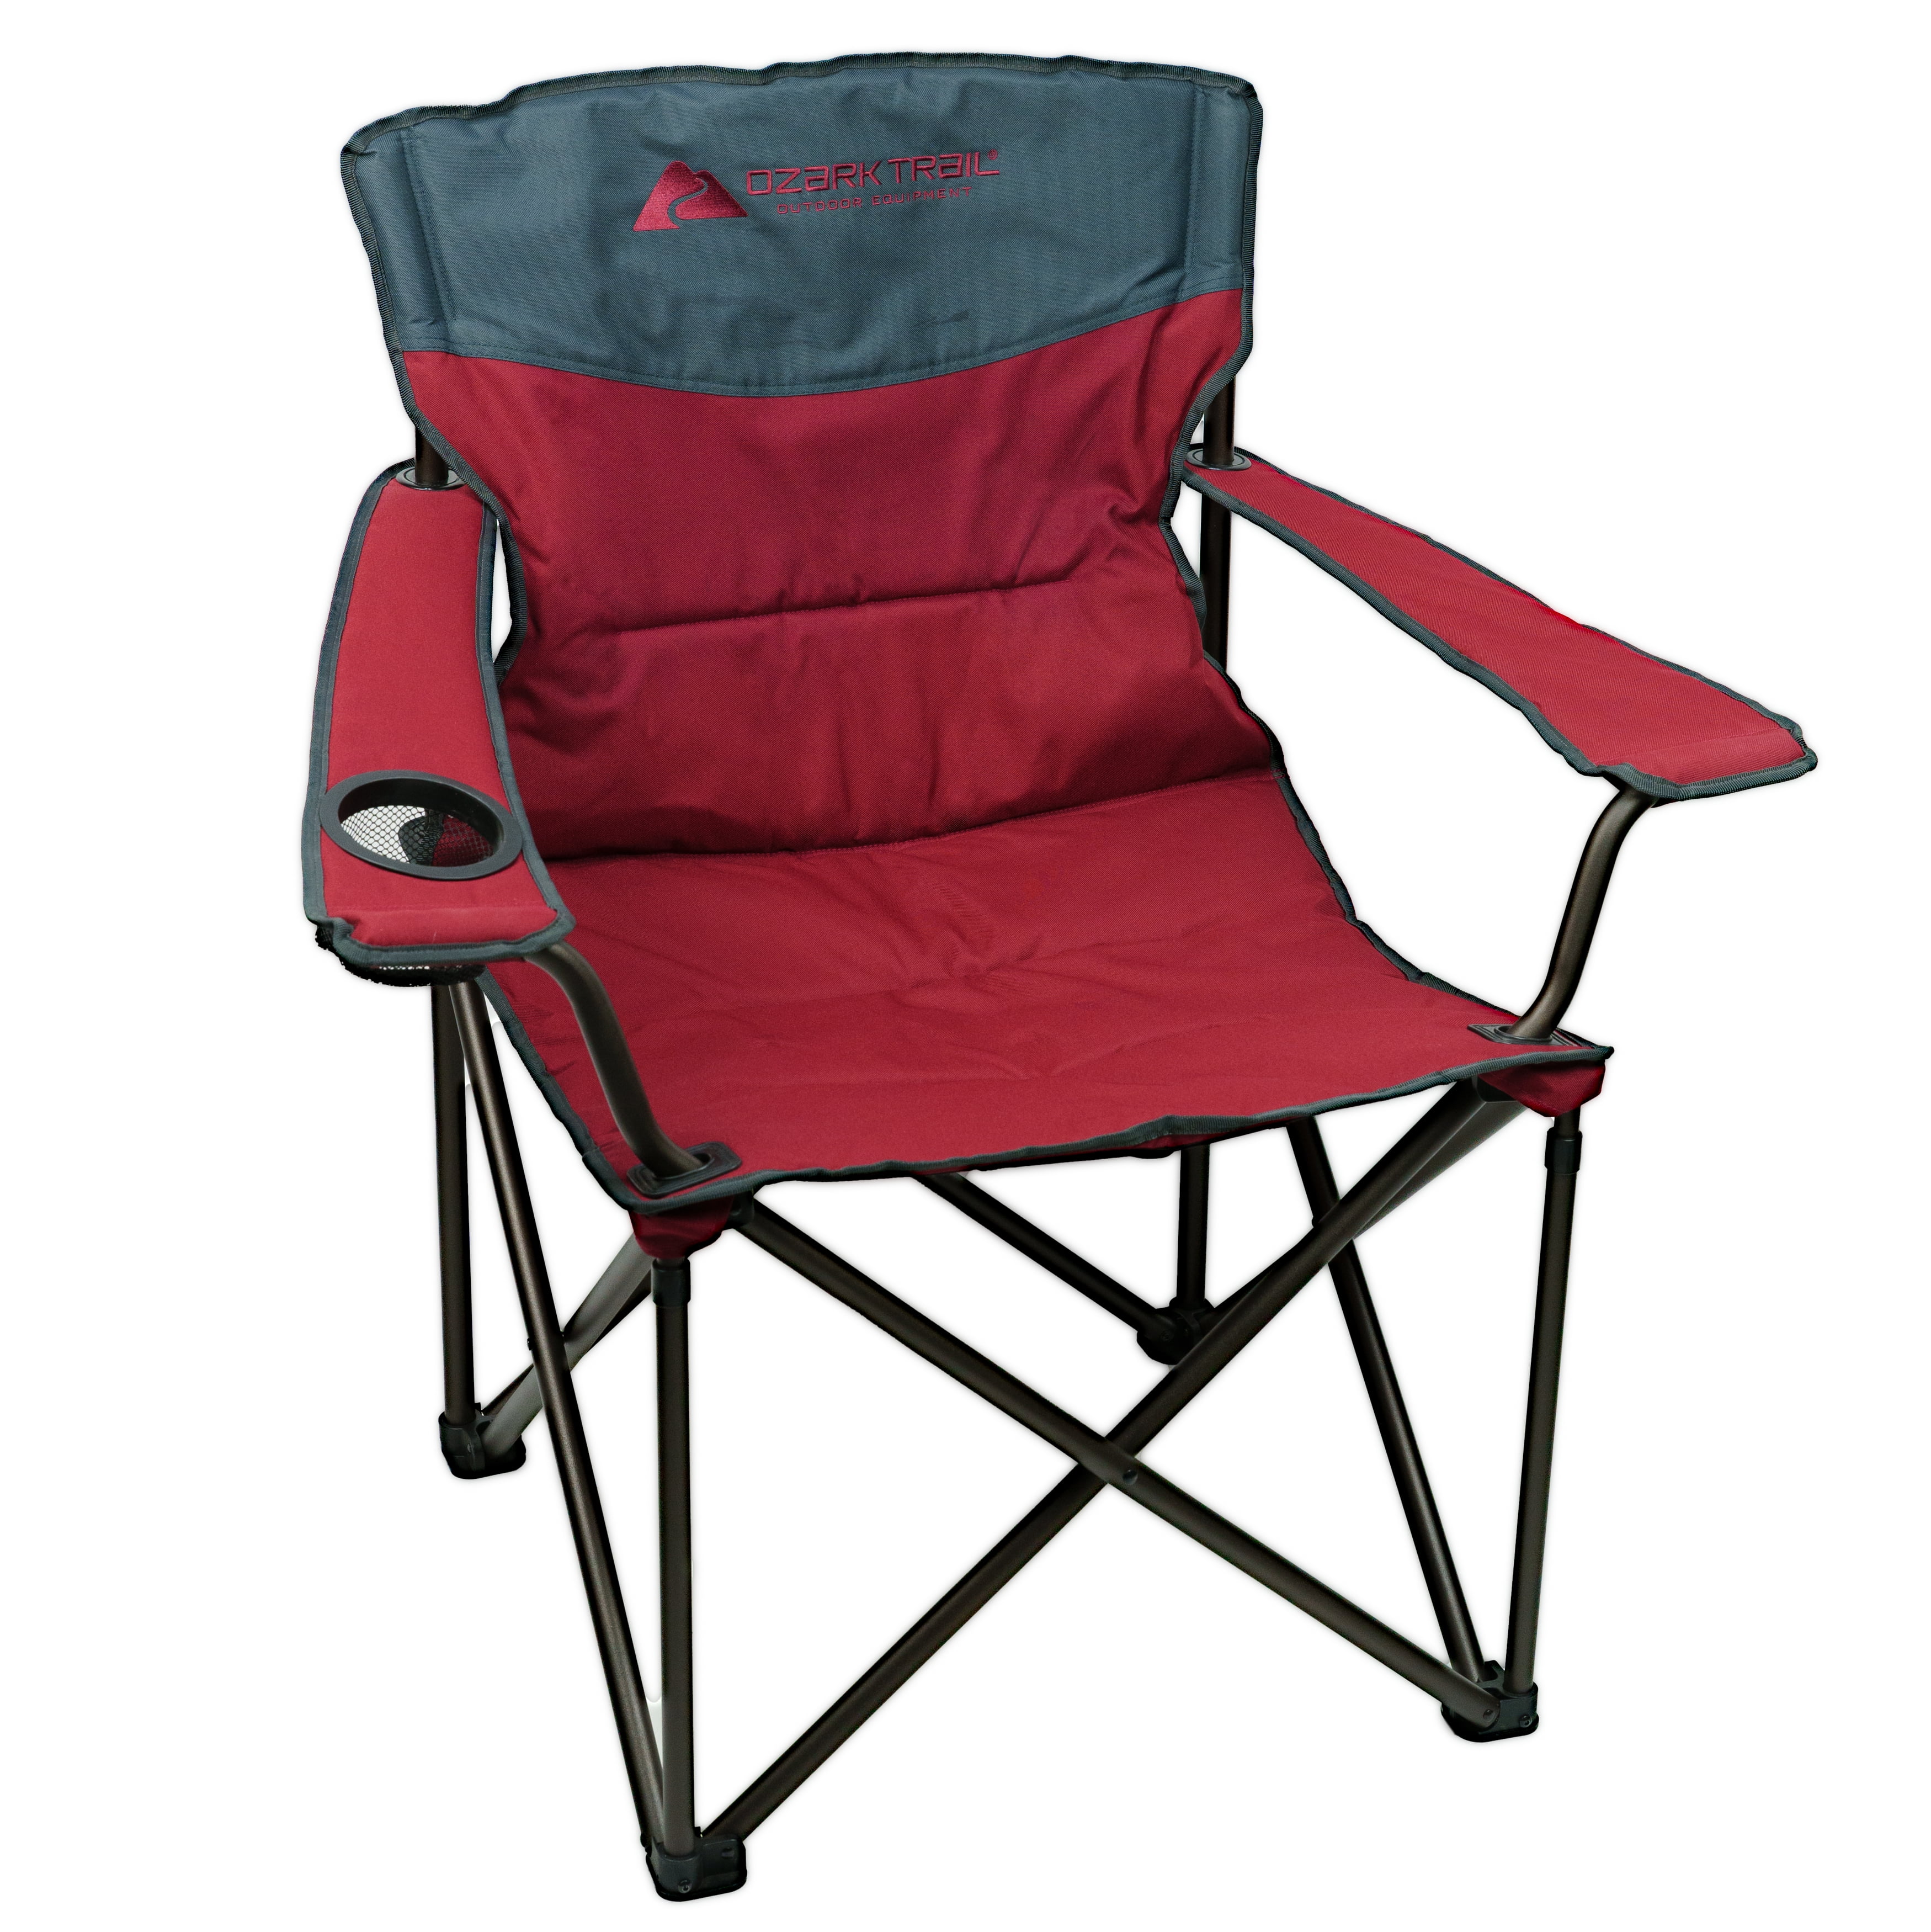 Milestone Lightweight Foldable Steel Camping Chair With Cup Holder Carry Case 